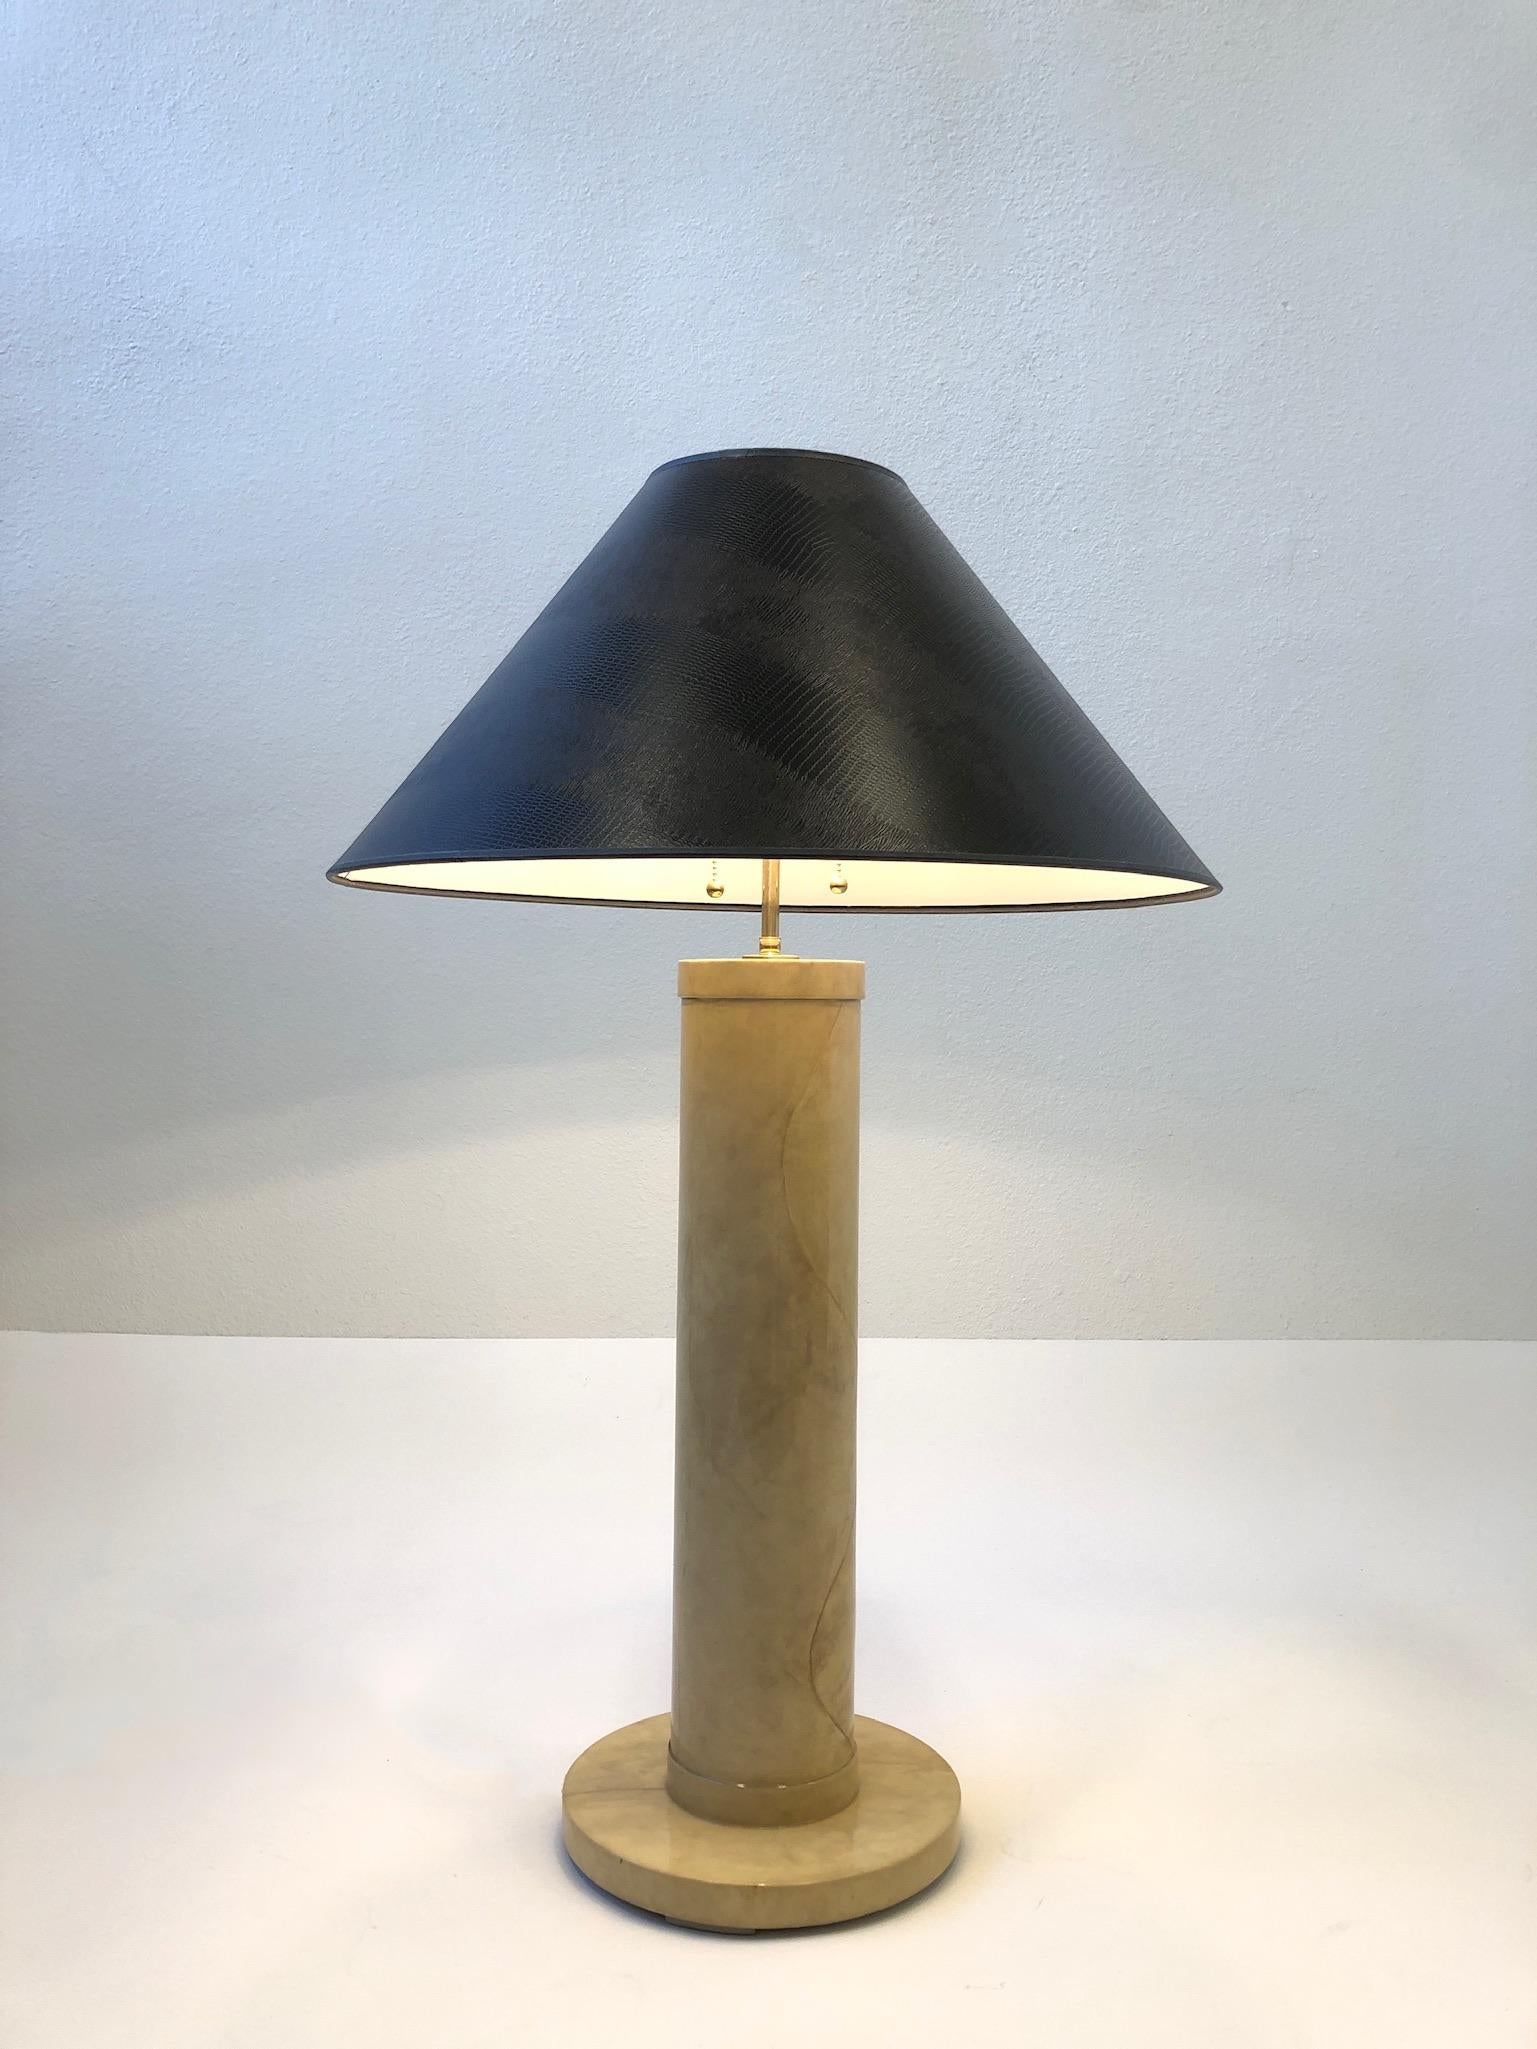 Beautiful 1980s goatskin parchment table lamp by J. Robert Scott.
Constructed of wood that’s covered with goatskin and then clear lacquered.
Newly rewired with new brass hardware and new brown faux reptile print shade. 
Measurements: 24” diameter